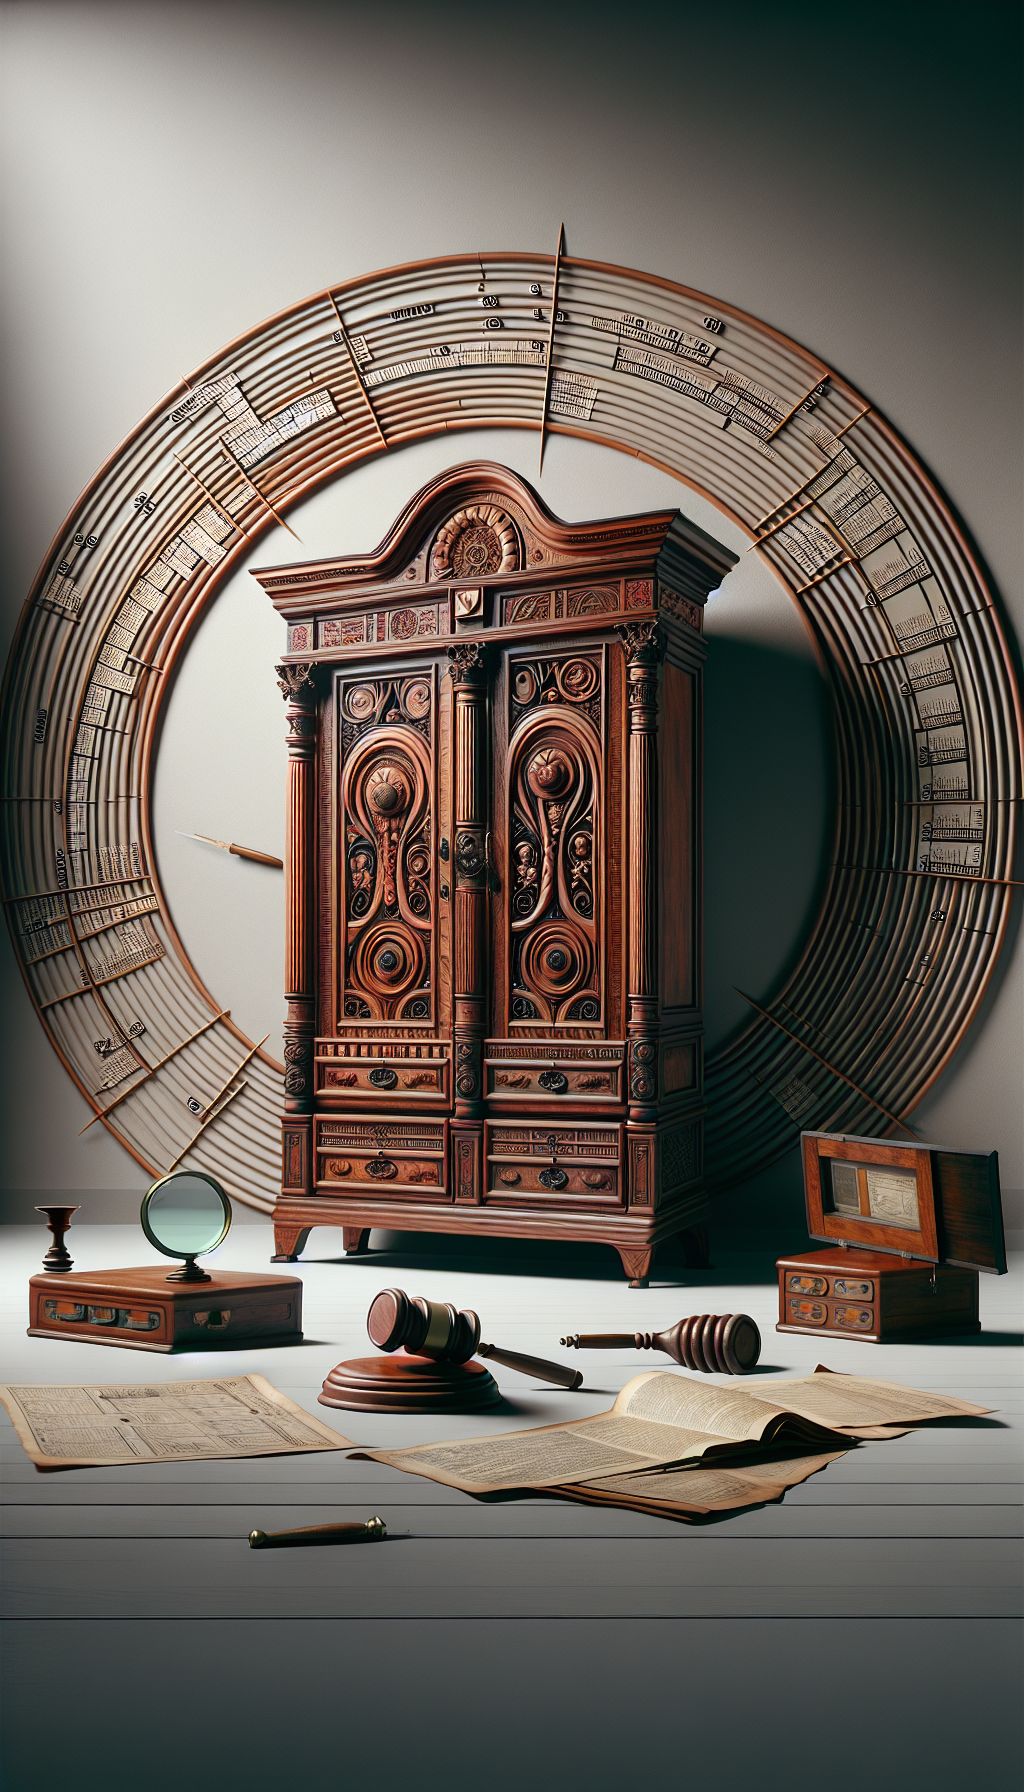 An elegant armoire stands amidst a swirling timeline, with Victorian, Regency, and Art Nouveau motifs cascading over its wood. Each panel showcases distinct historical styles, with age rings on the wood symbolizing the armoire's increasing value over time. Antique appraisal tools like a magnifying glass and auction gavel subtly frame the piece.